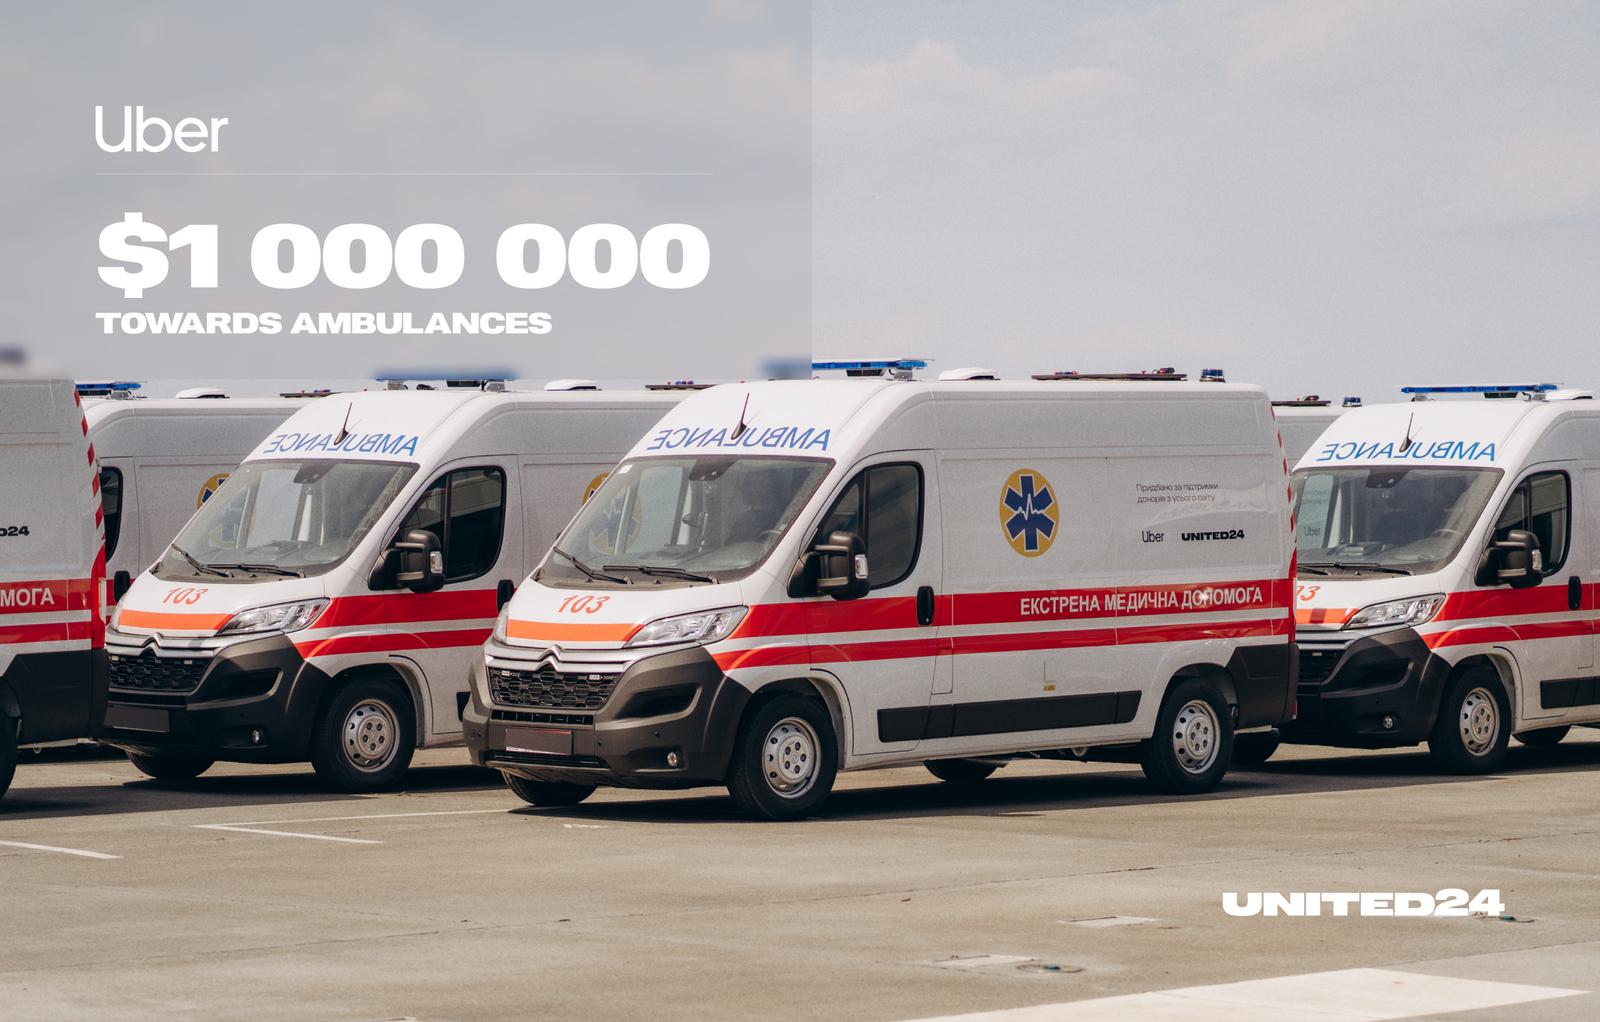 $1,000,000 from Uber for ambulances